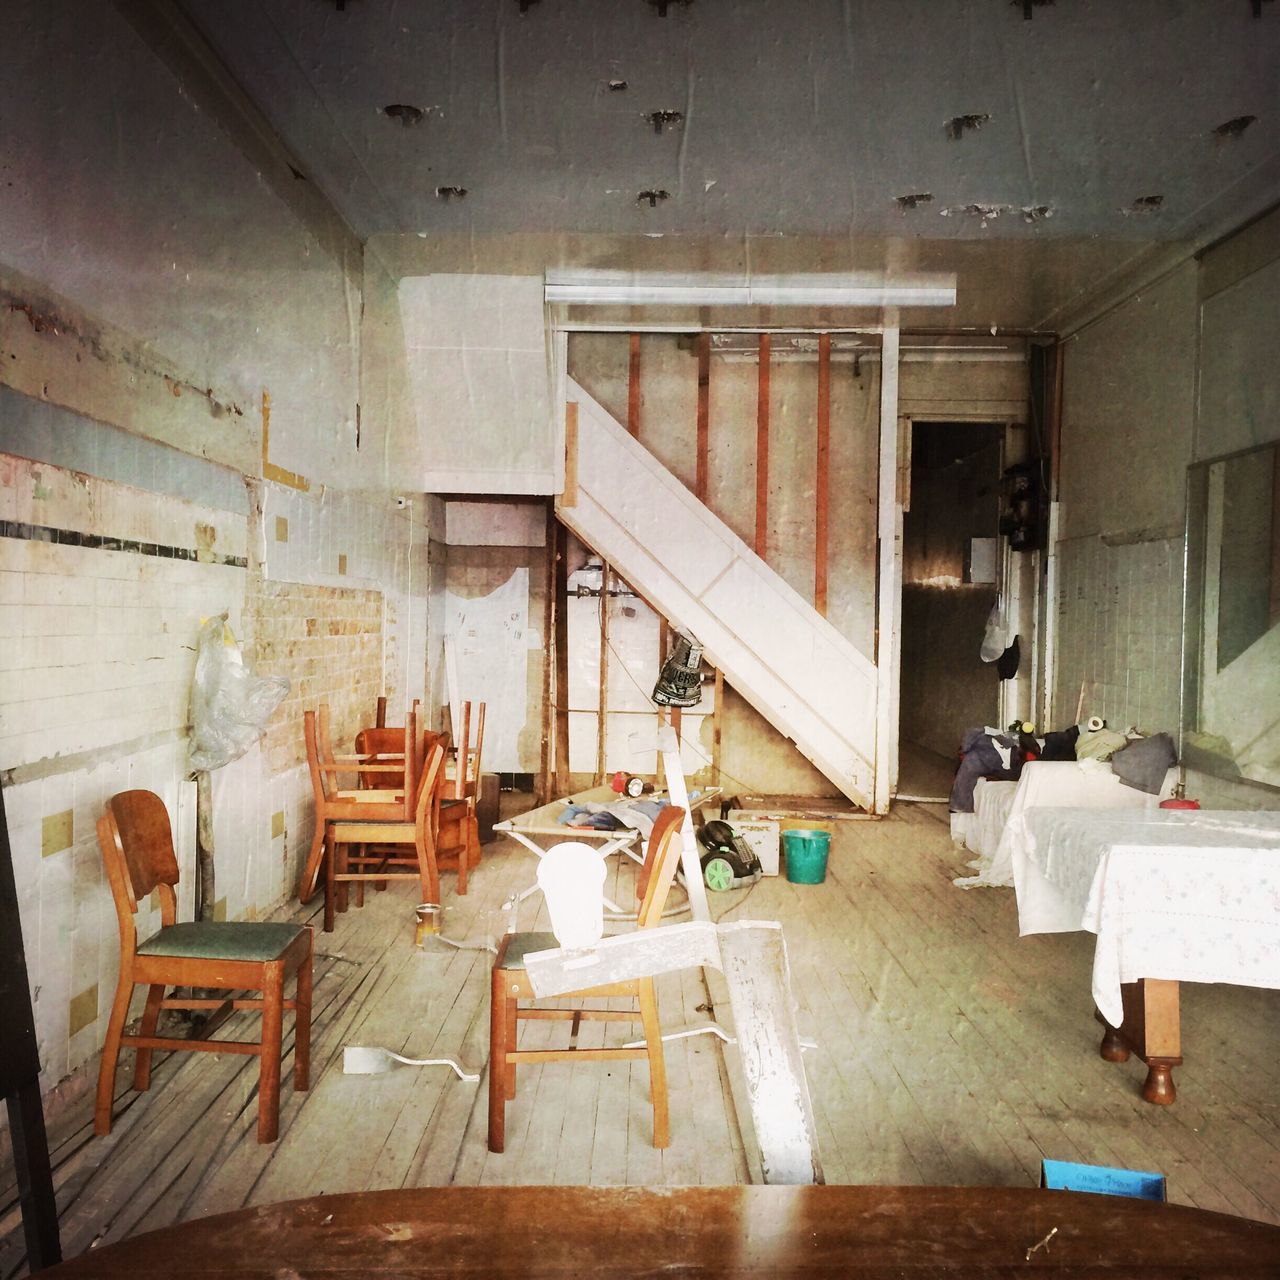 indoors, chair, absence, messy, table, abandoned, empty, house, home interior, architecture, interior, built structure, wood - material, old, furniture, damaged, obsolete, domestic room, window, room